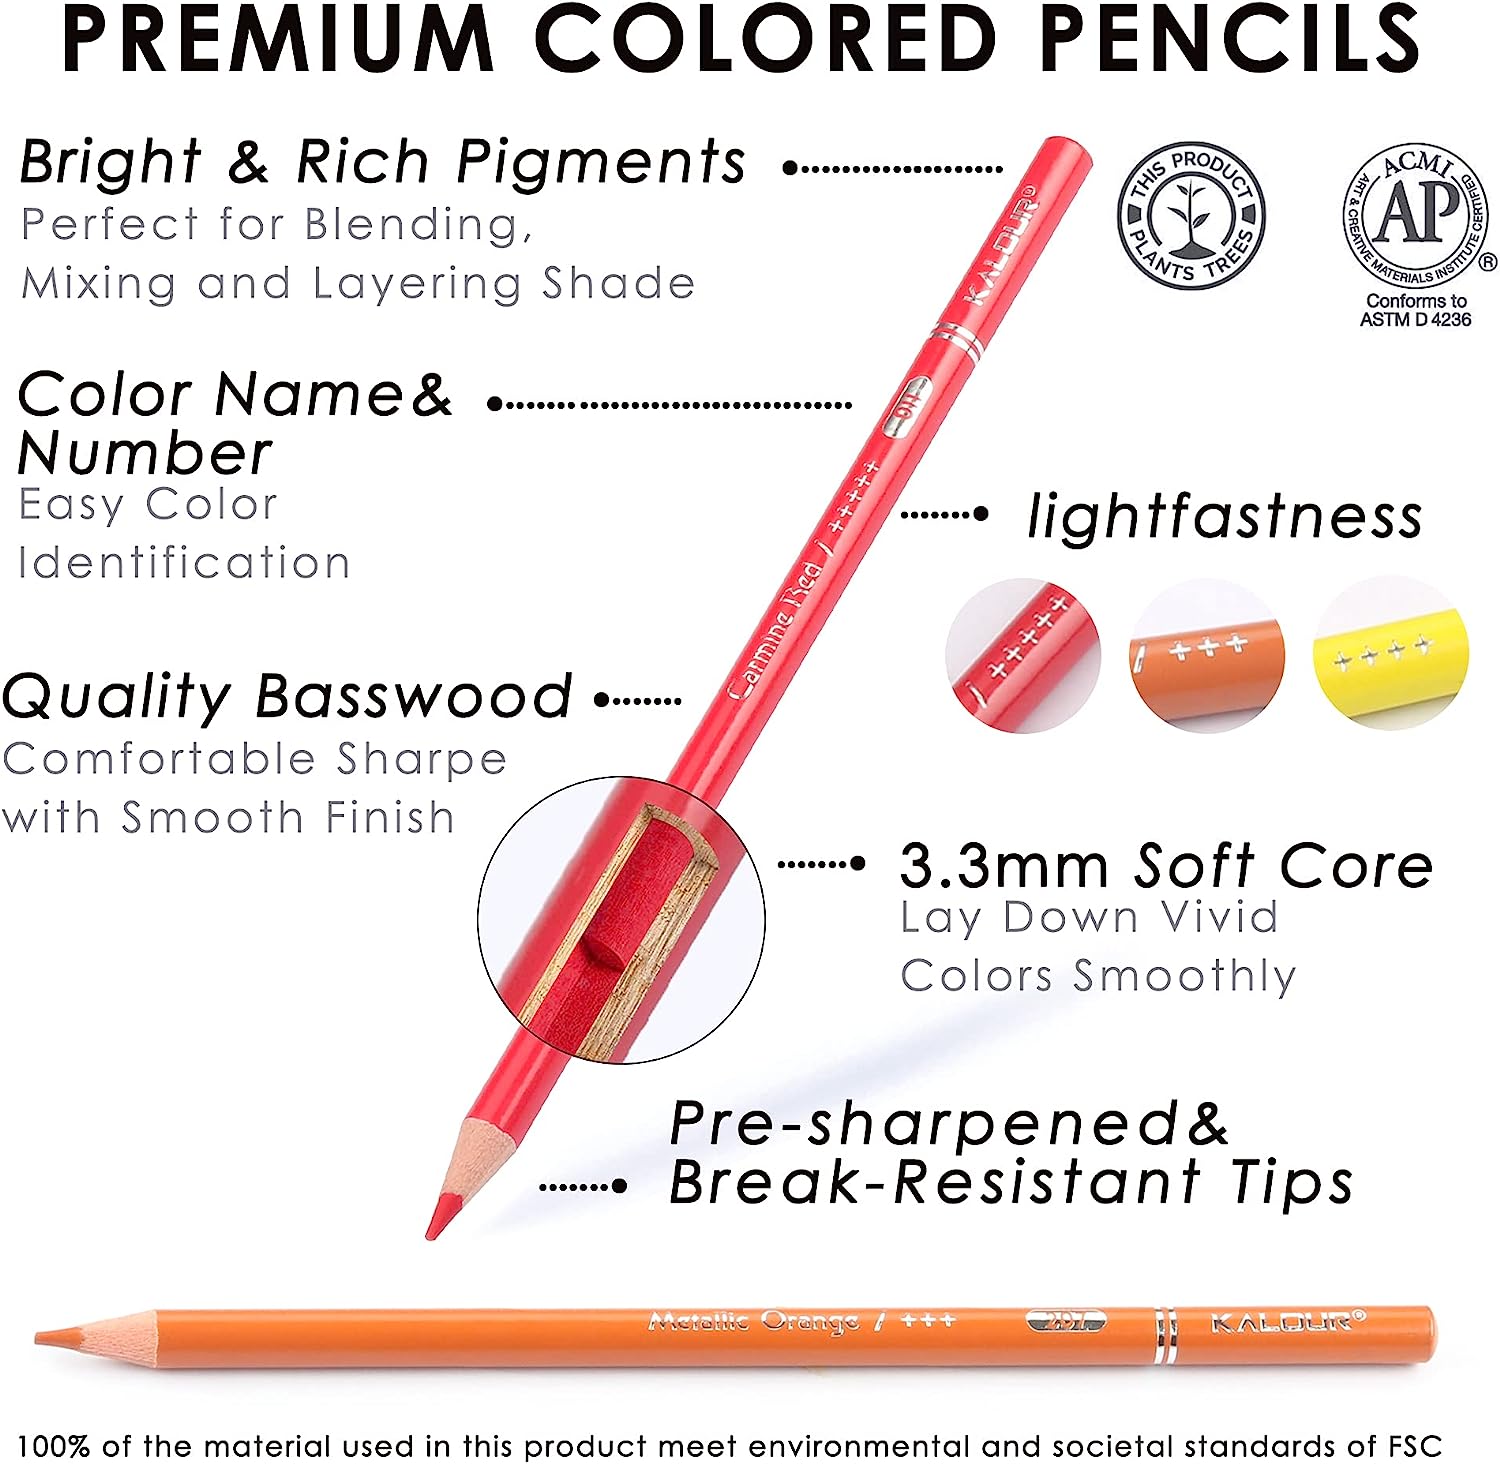 520-Color Colored Pencils for Adult Coloring Books, Soft Core